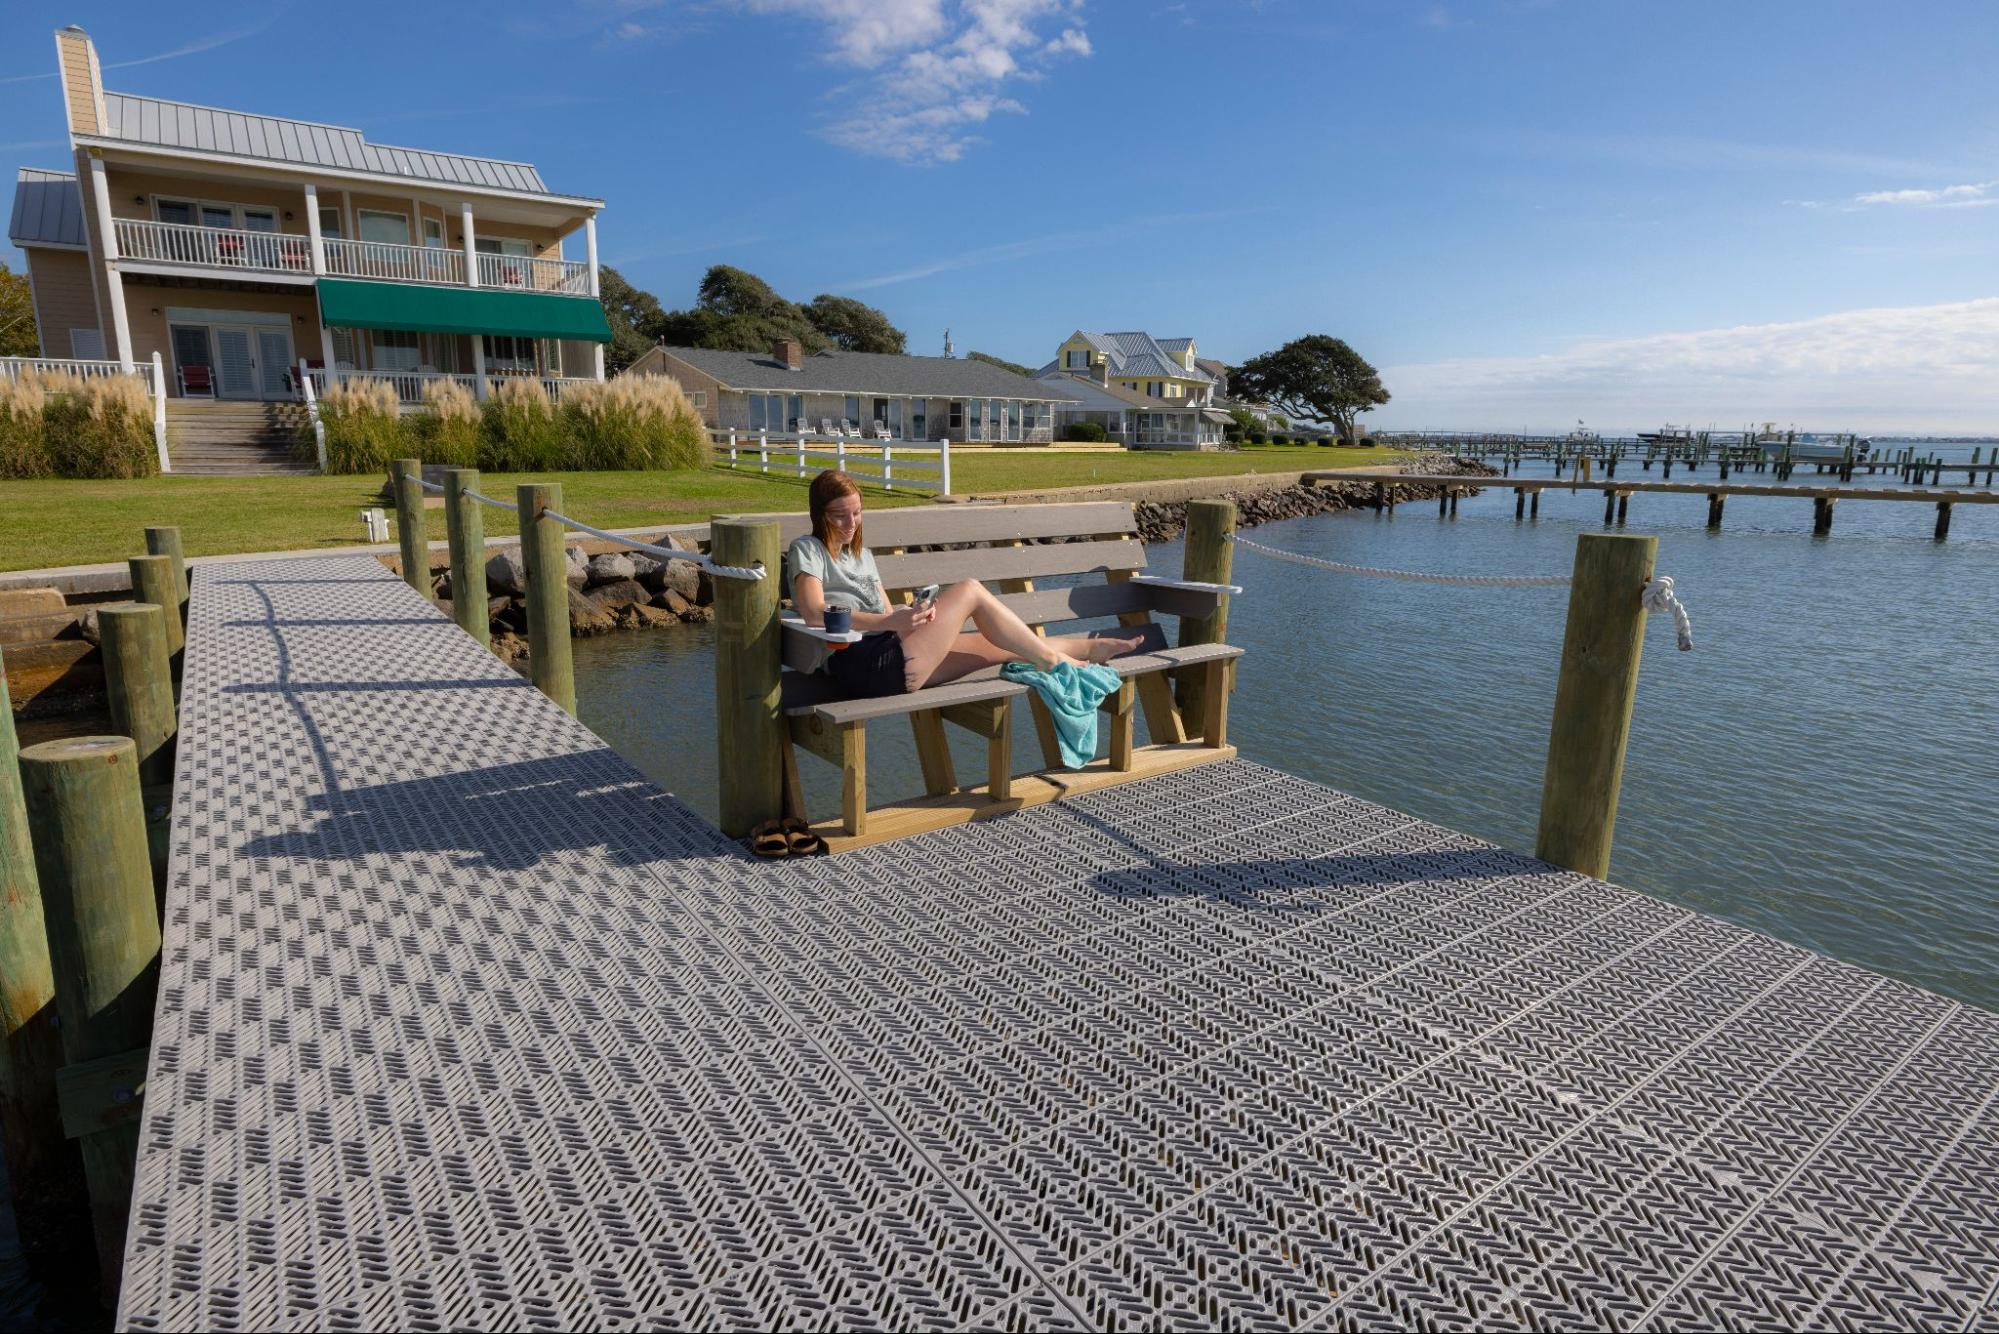 The view of a person sitting on a bench on a deck. The deck is in front of a waterfront home.